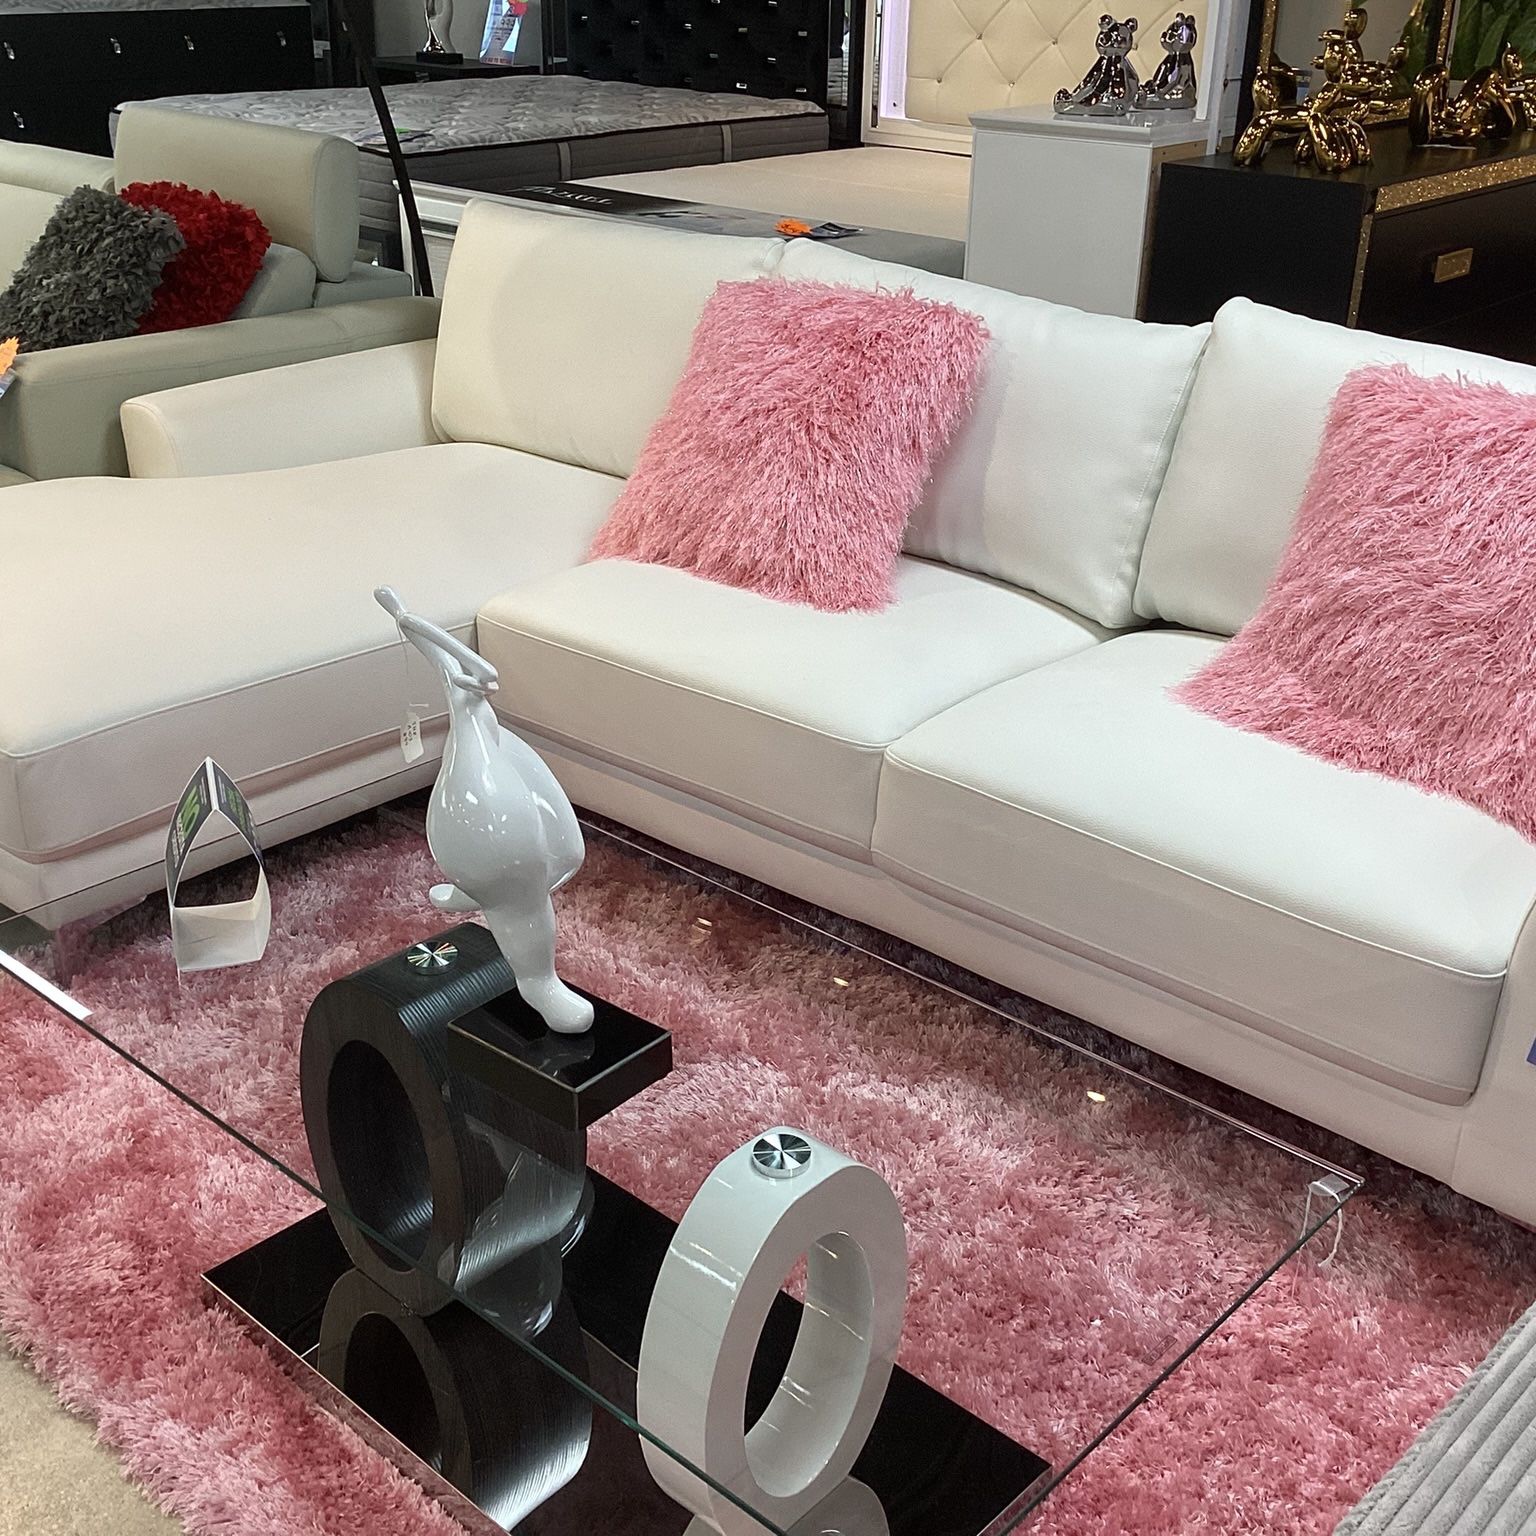 Beautiful Sofa Sectional L On Sale Now For $799 Available In Black Gray And White Color 